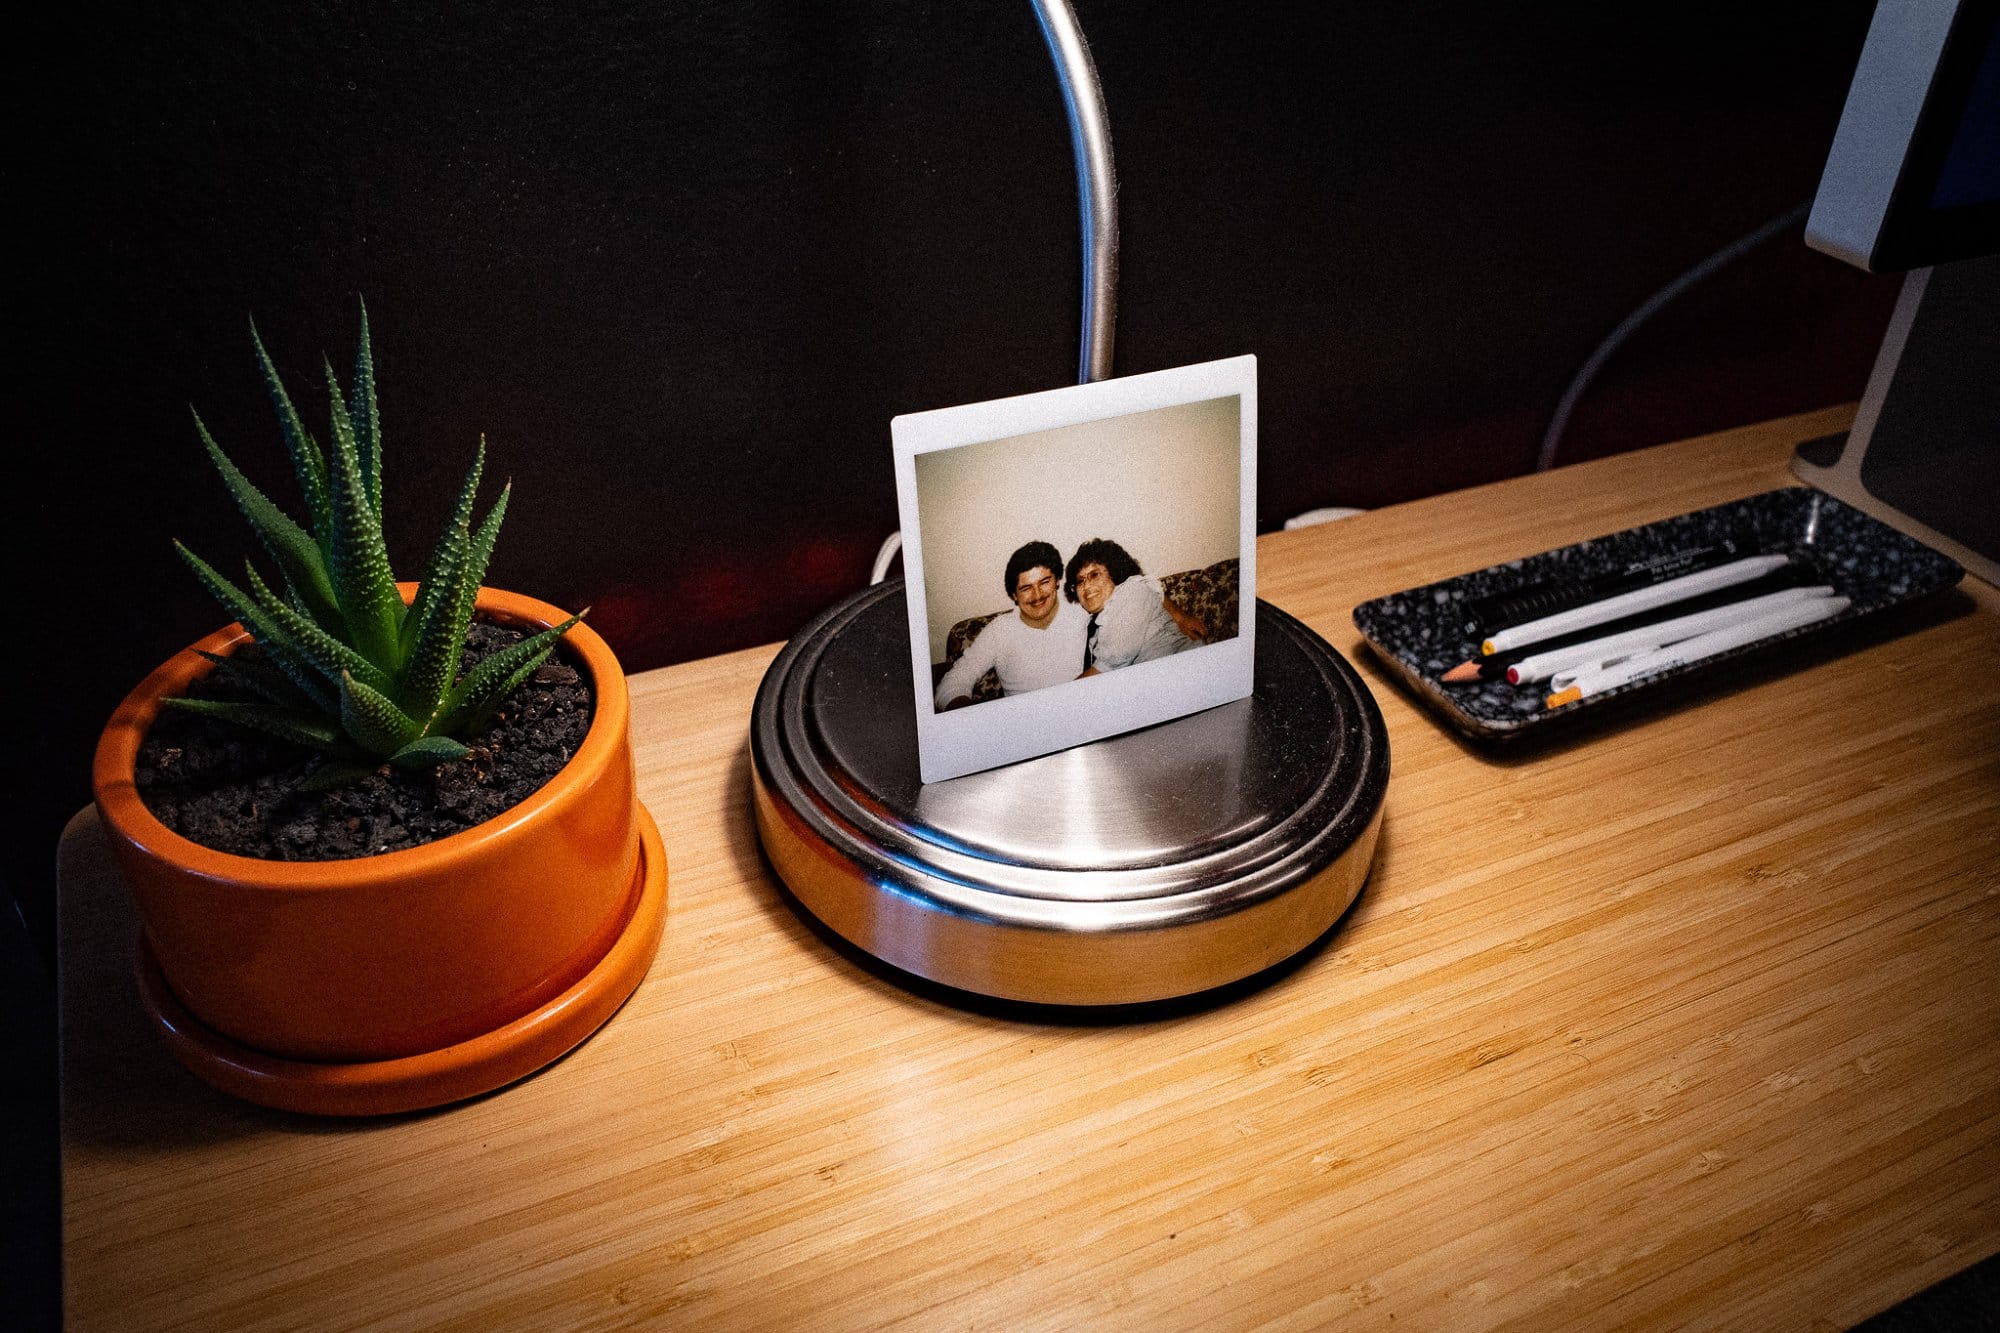 A potted aloe plant, a Polaroid photo held by a metallic stand, and a tray with pens on a wooden desk